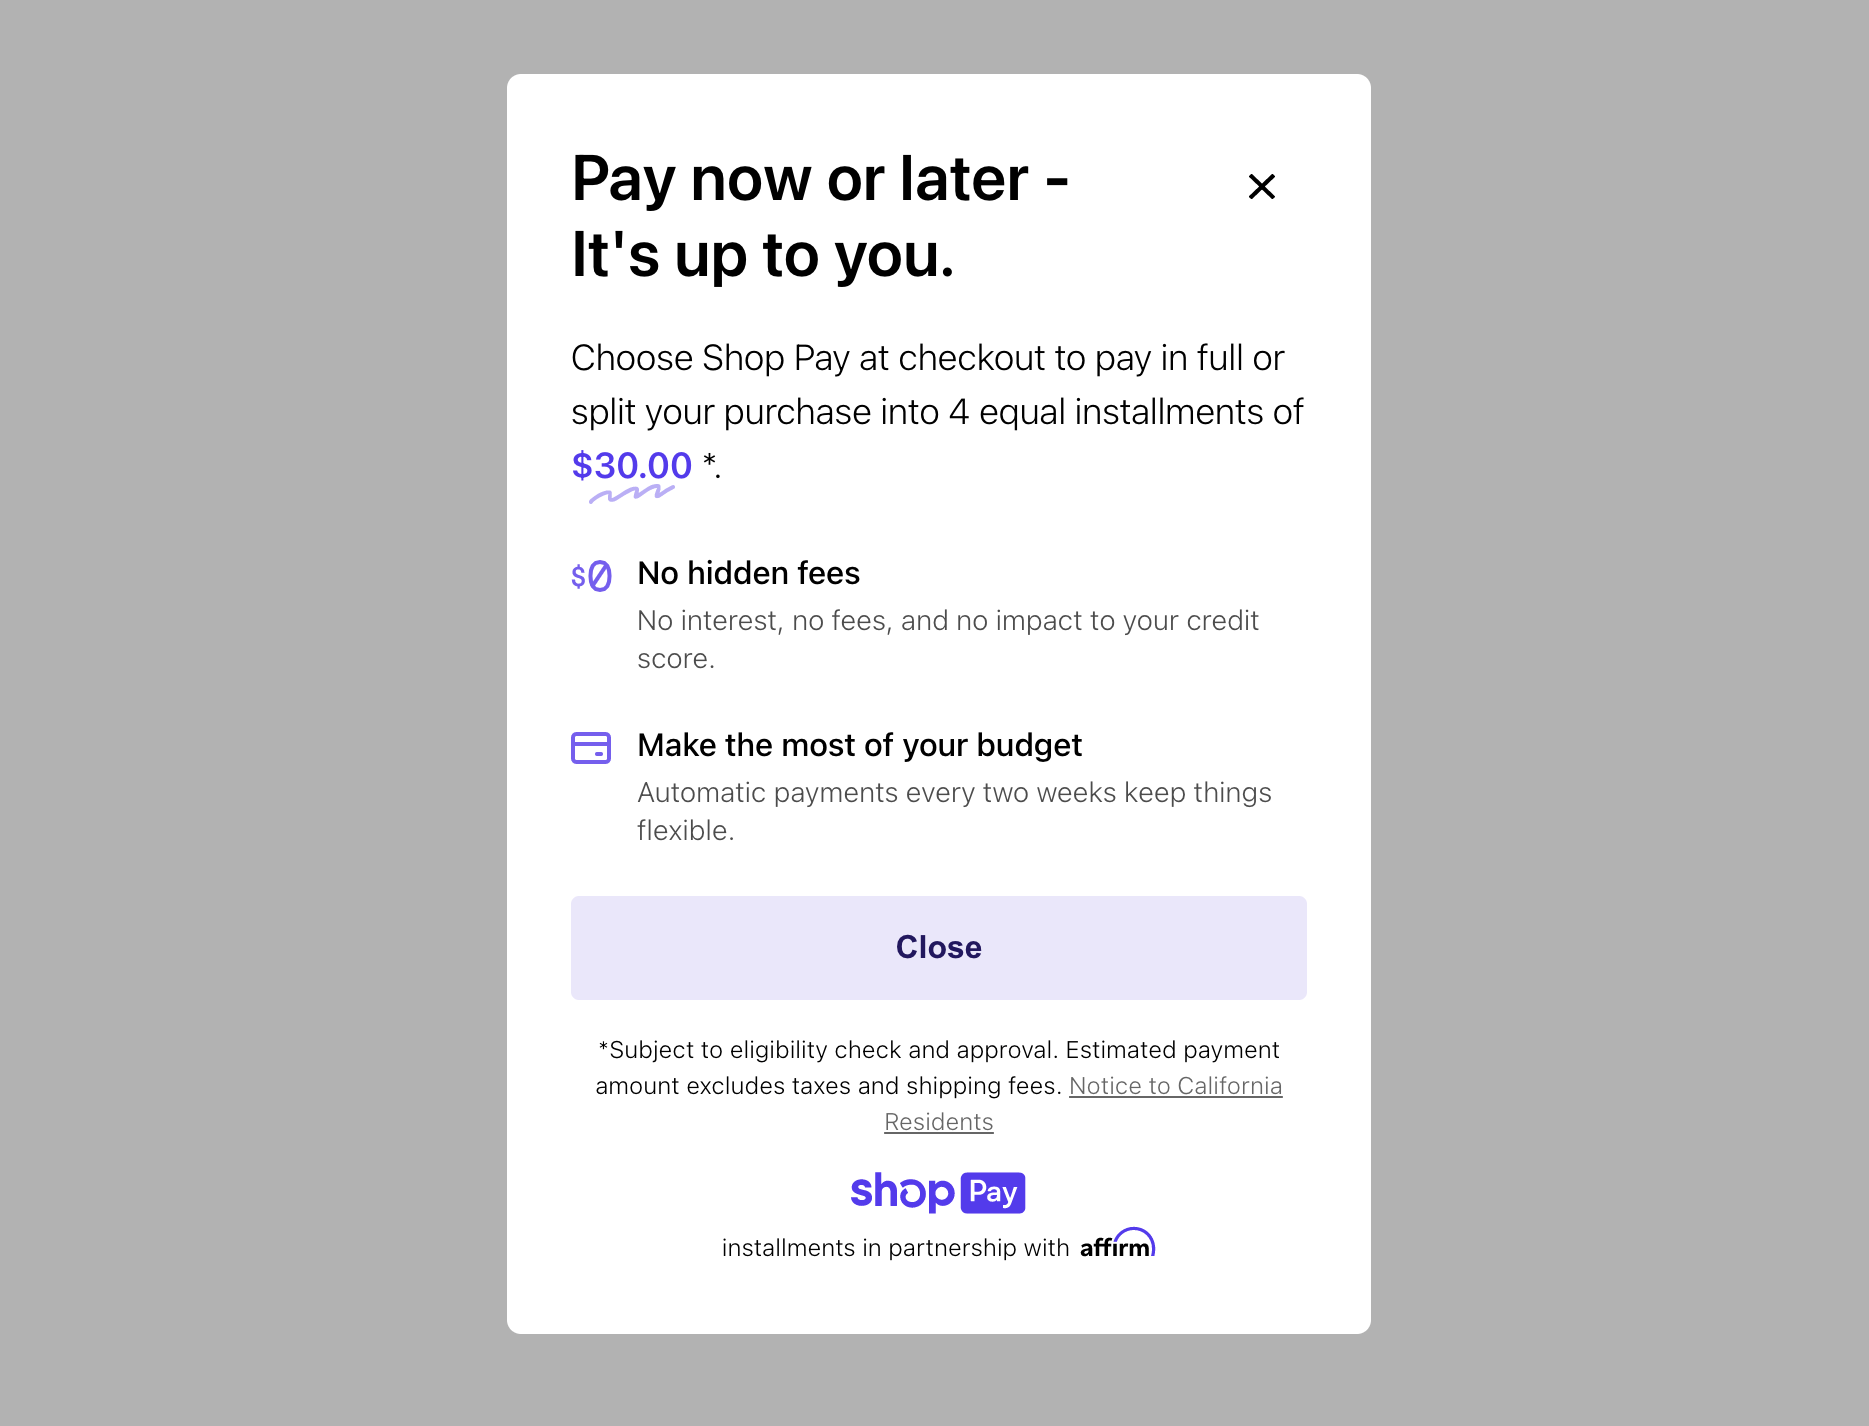 modal_window_for_shop_pay_instalments_banner.png